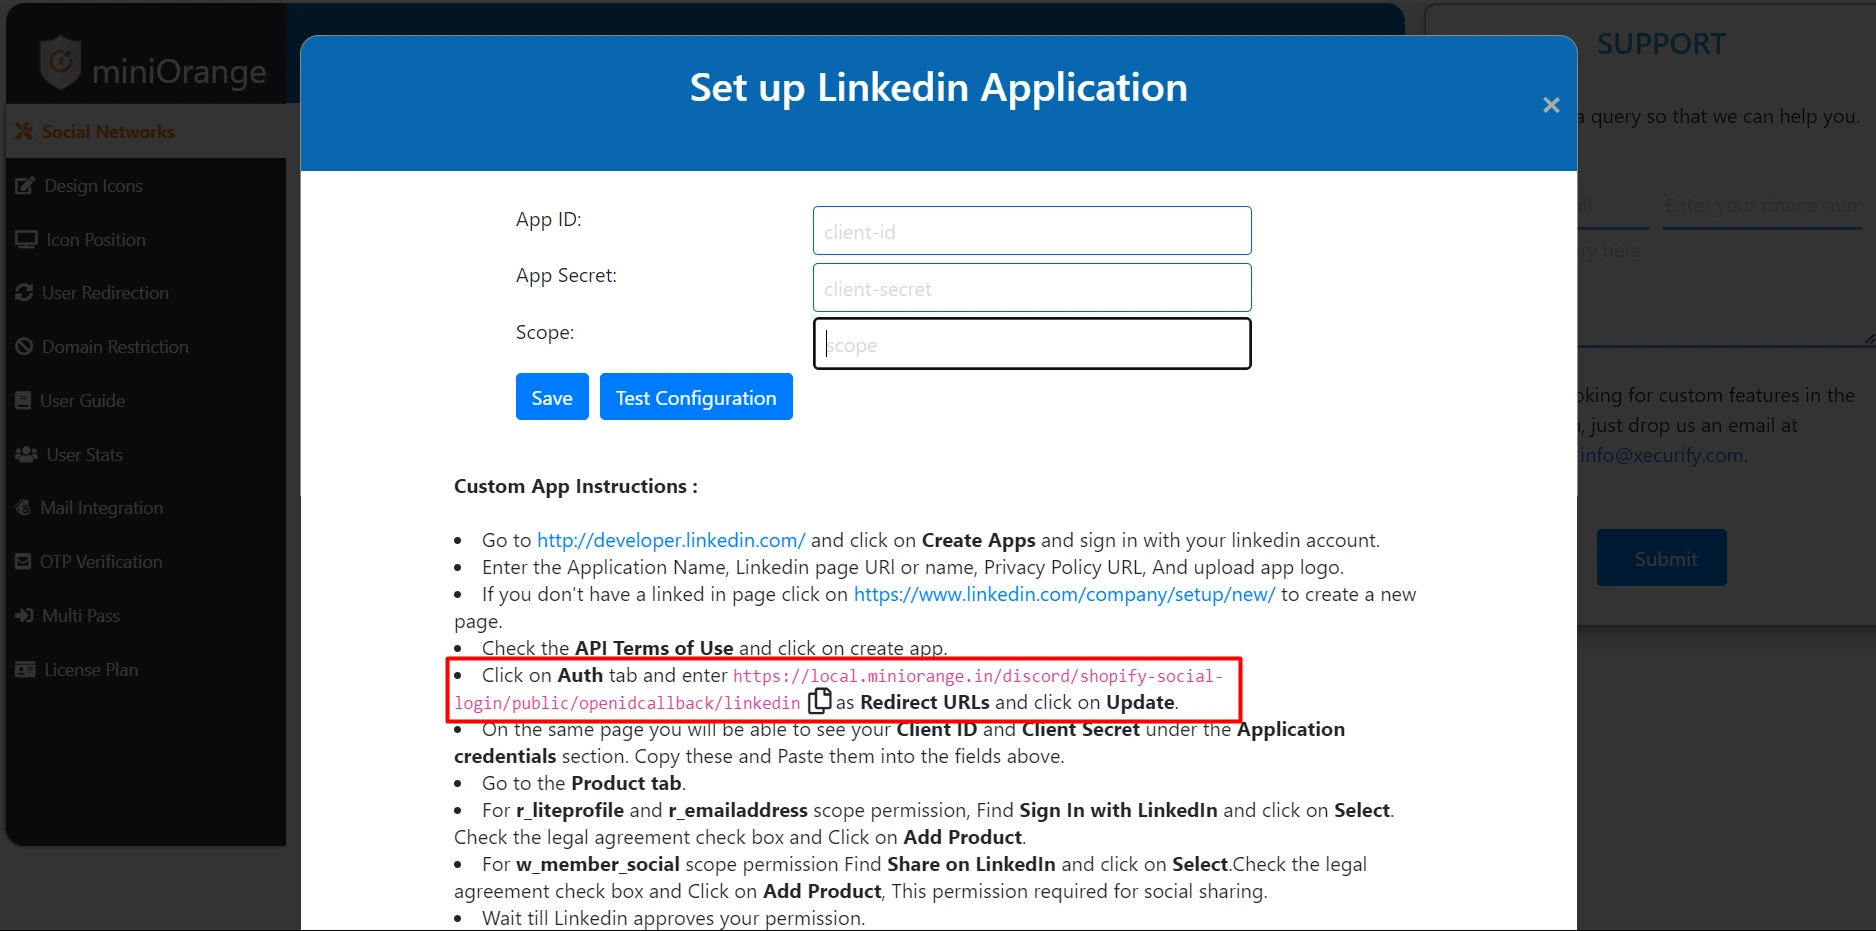 Shopify Single Sign-On (SSO) using LinkedIn as IDP | Shopify LinkedIn SSO - Application credential